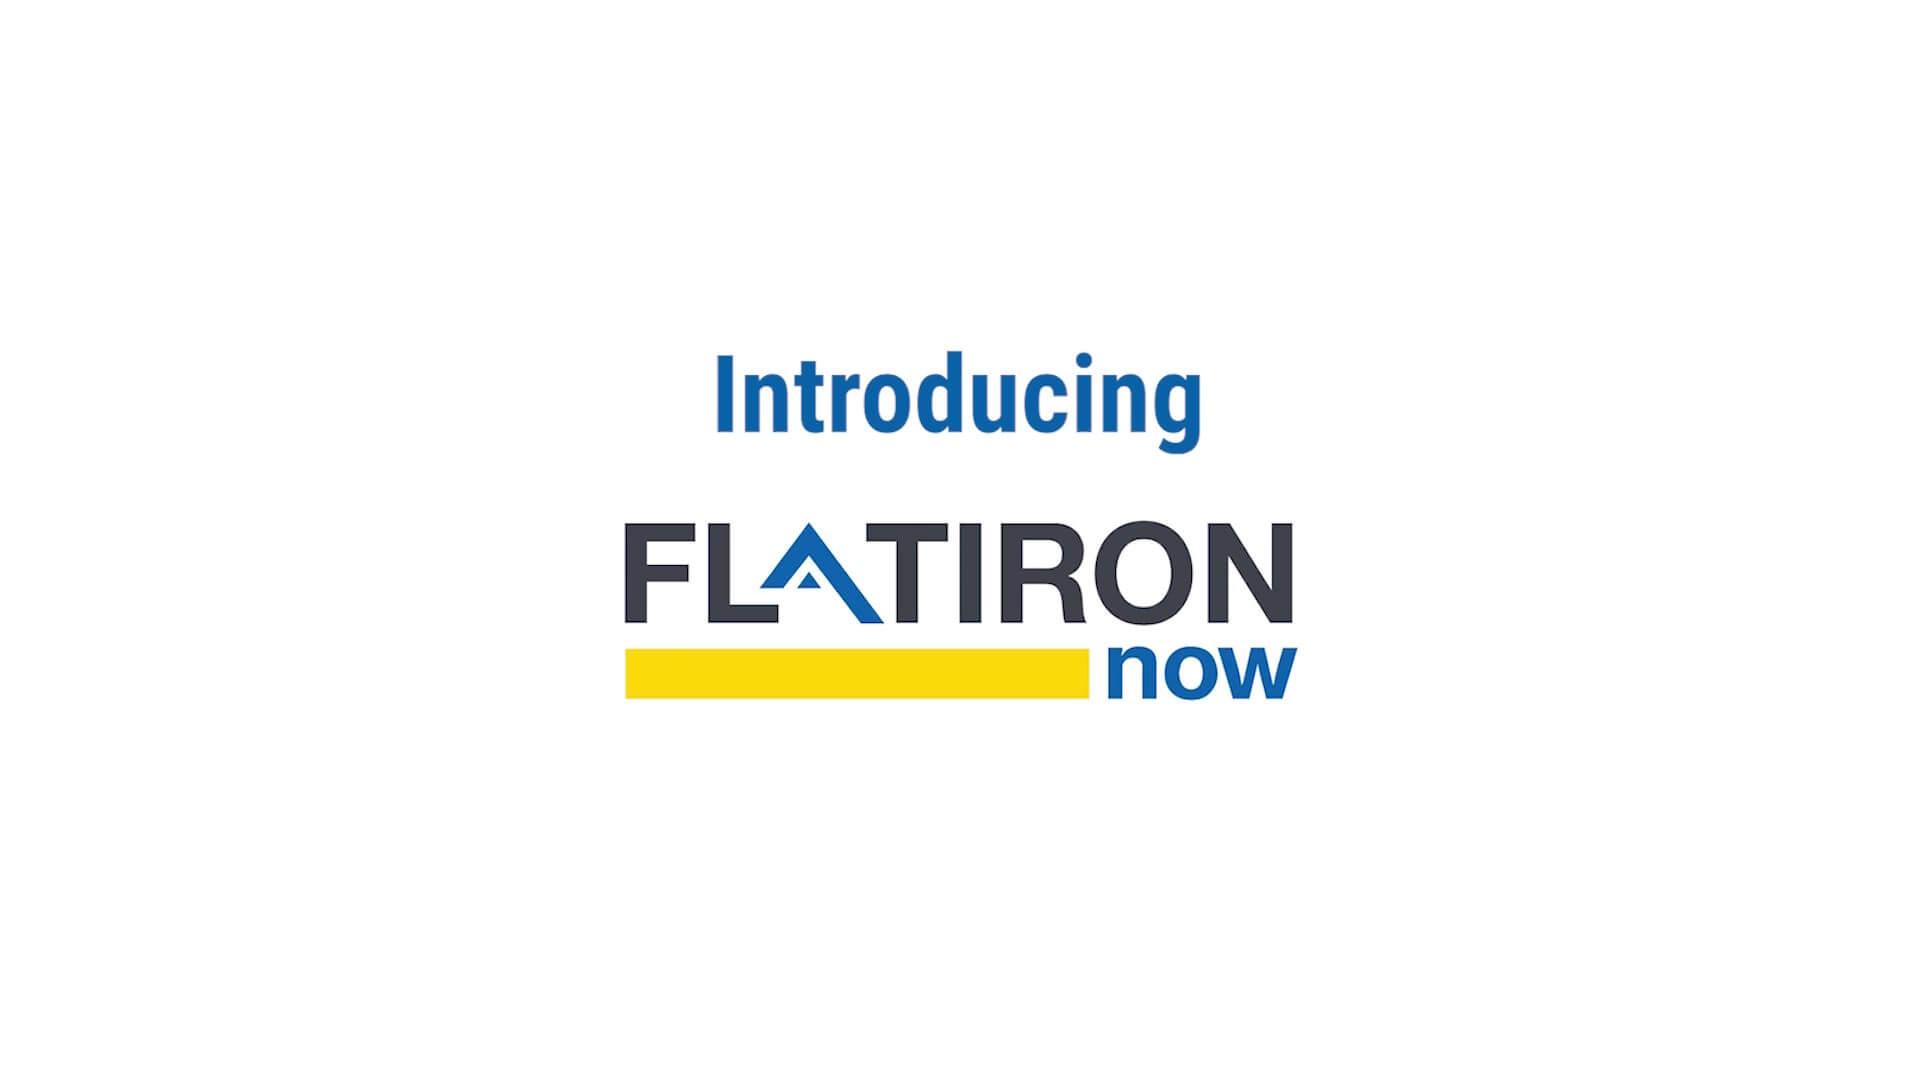 FlatironNow - an app created by Flatiron for our employees